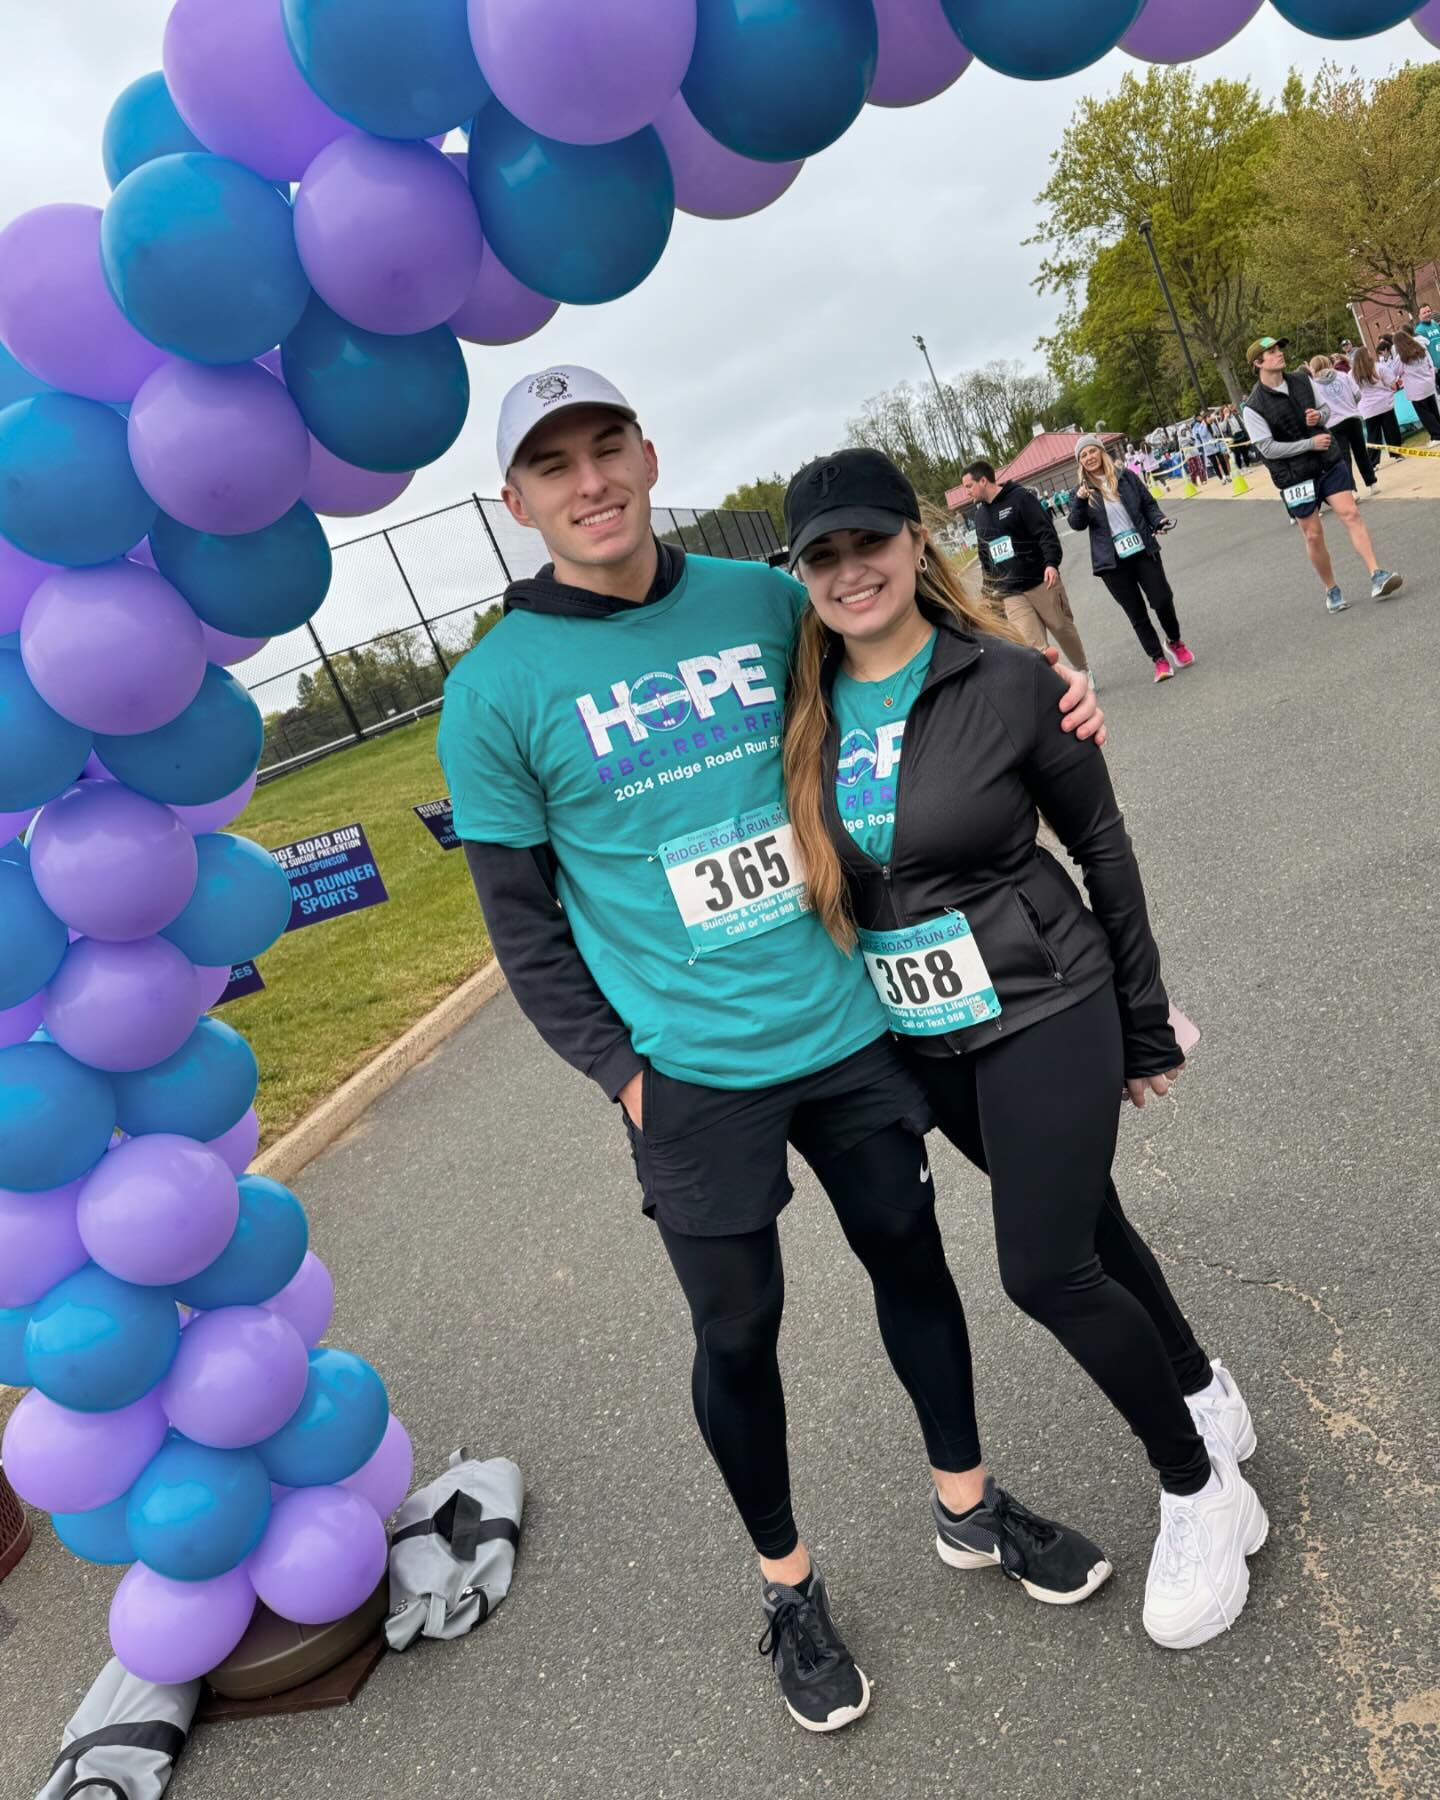 Just finished up the Ridge Road Run 5K for a Suicide Prevention and Education.
This is a cause that is extremely close to my heart. 
I hope you know, you are not alone. 💜

National Suicide and Crisis Hotline: 988